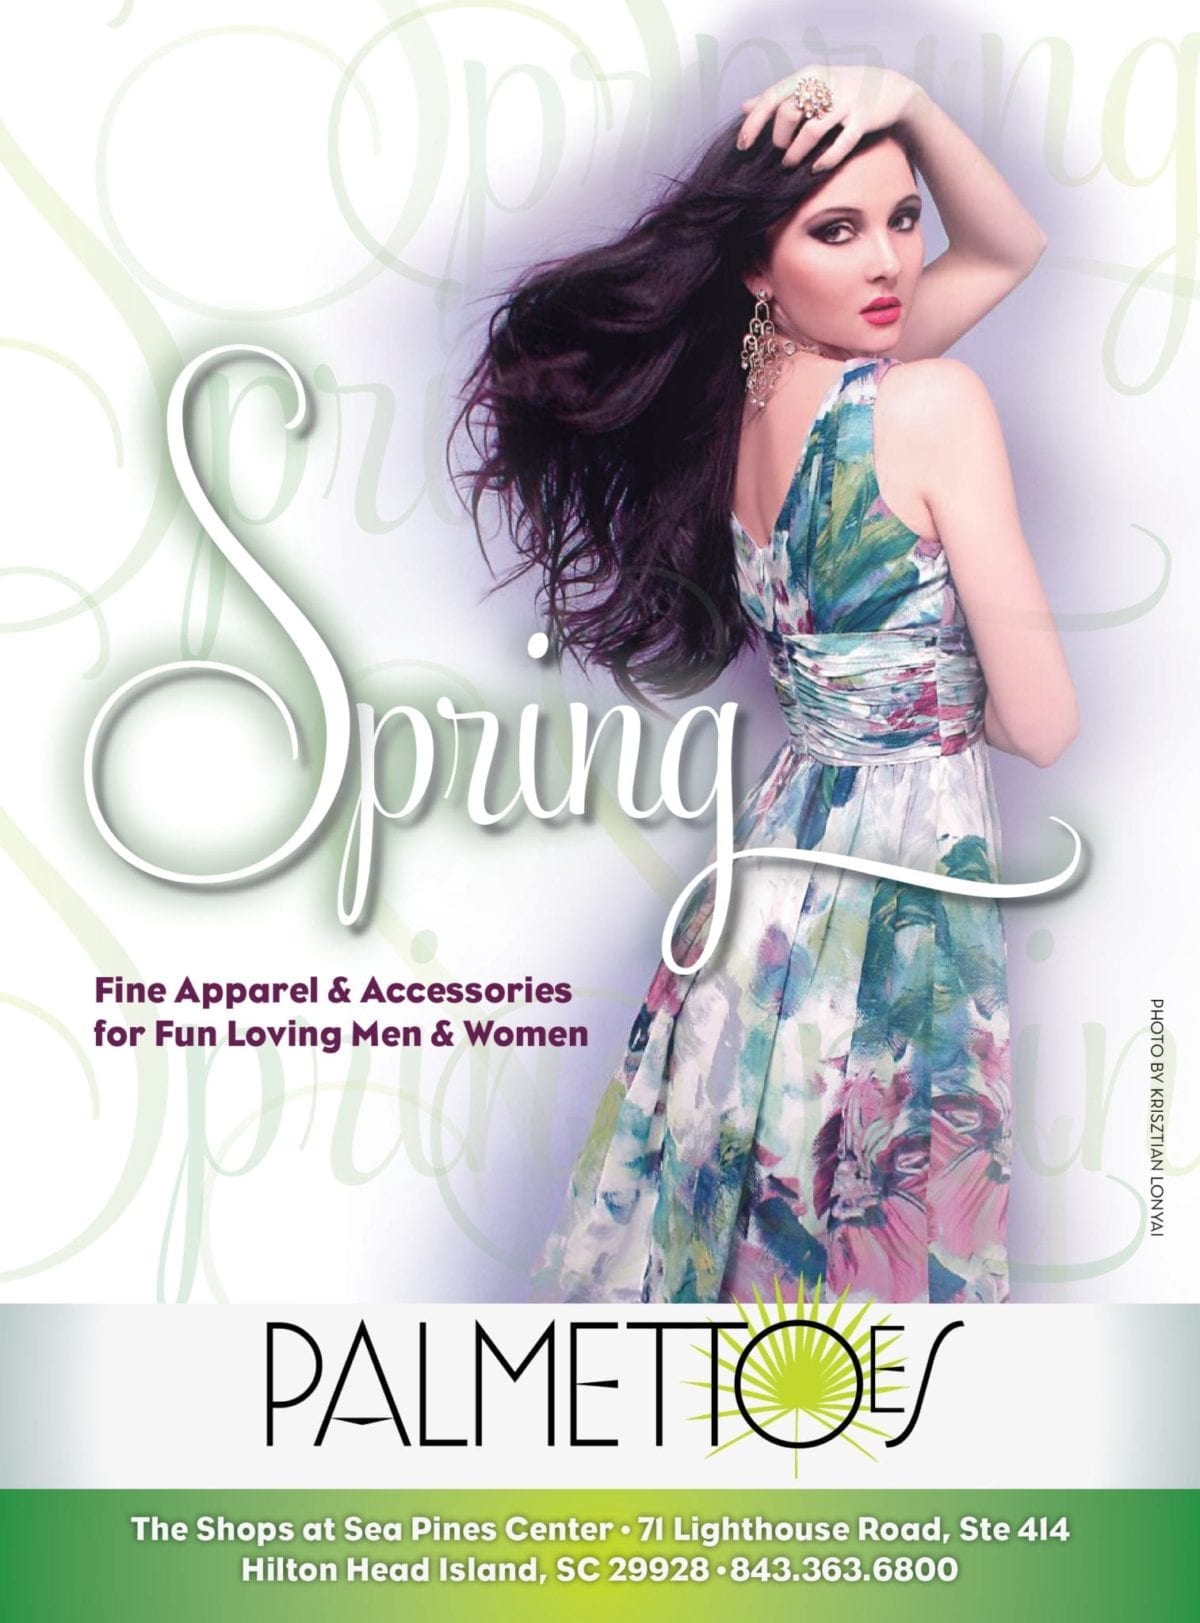 A full-page advertisement for a fashion boutique featuring a model with long brown hair and a floral dress